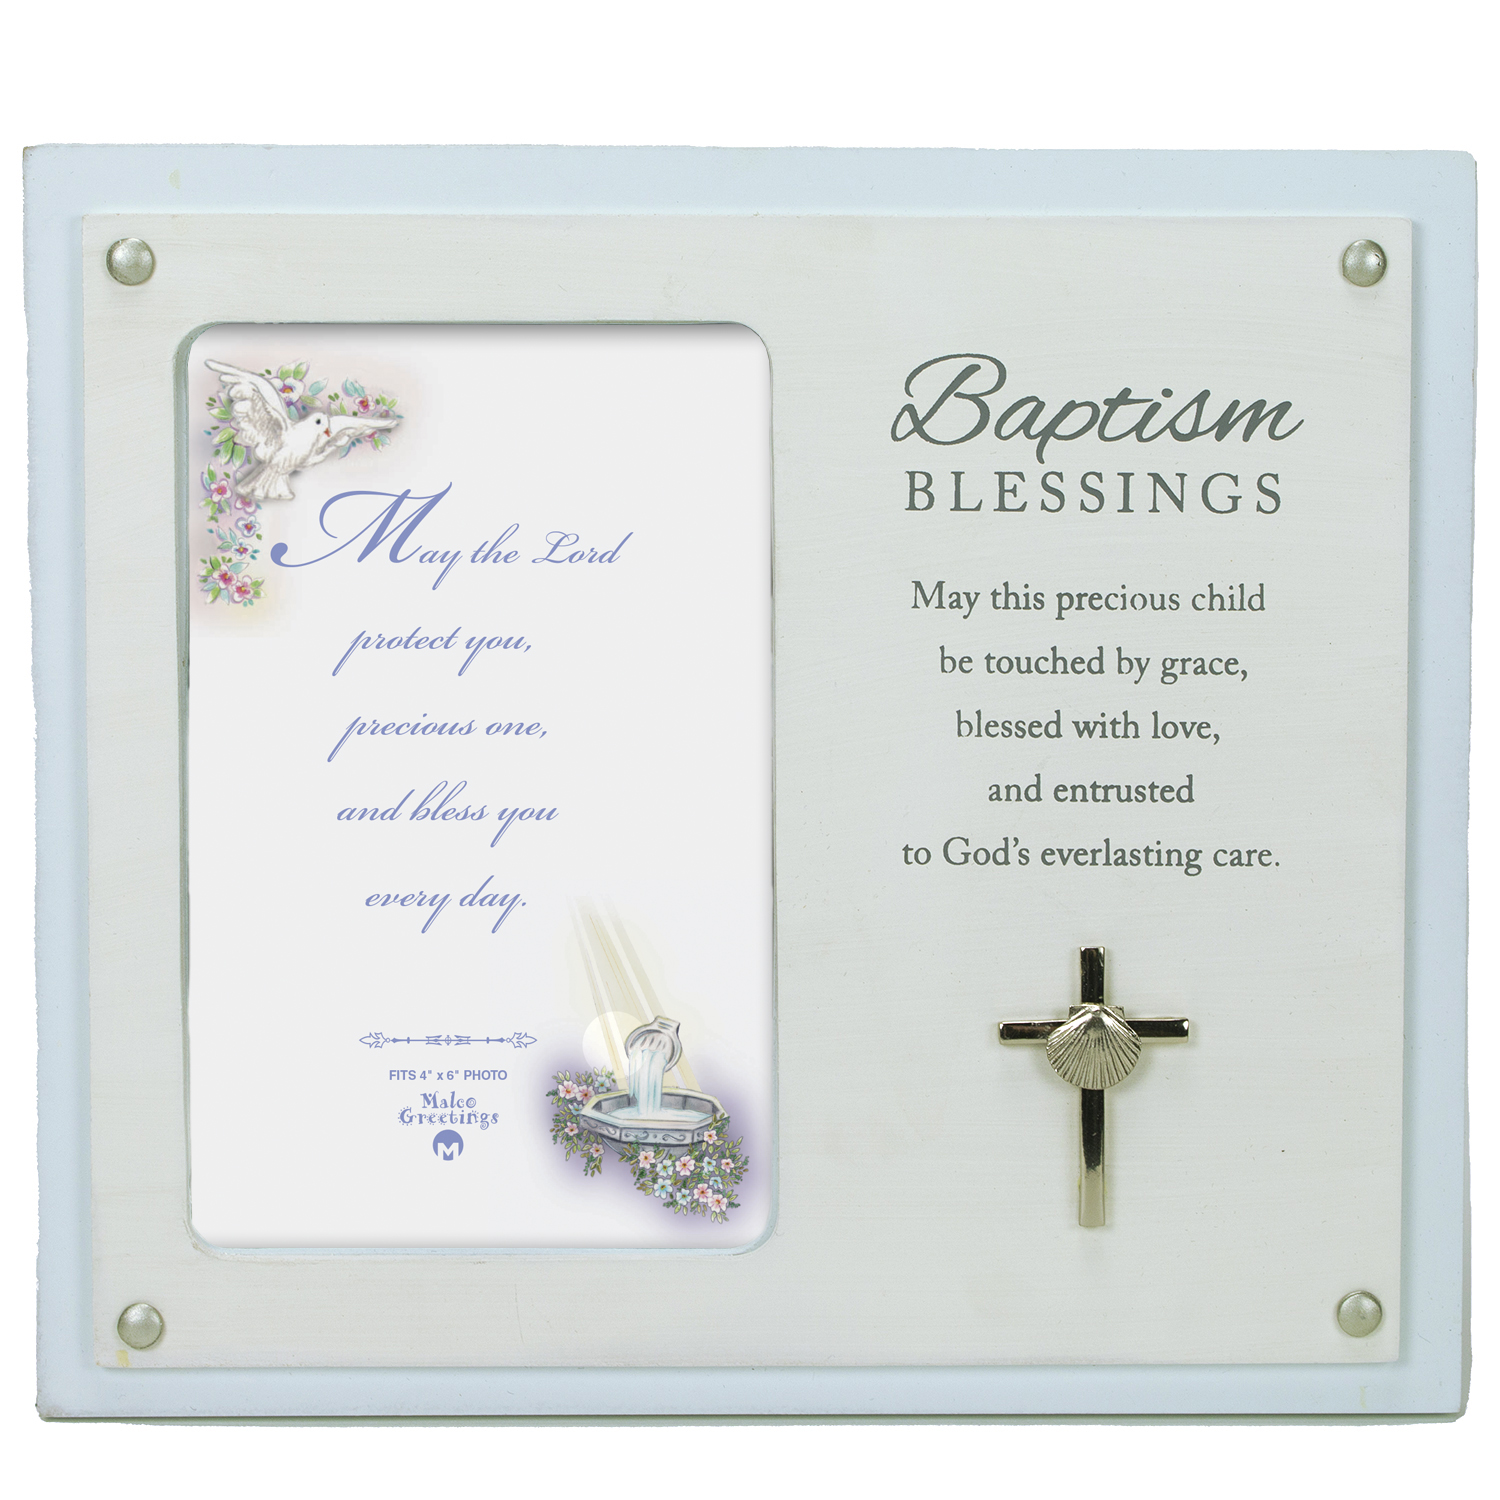 7.5in x8.5in Wood Boy's Baptism frame w/ & Metal Cross & Shell Accent hangs or stands - holds 4in x6in photo